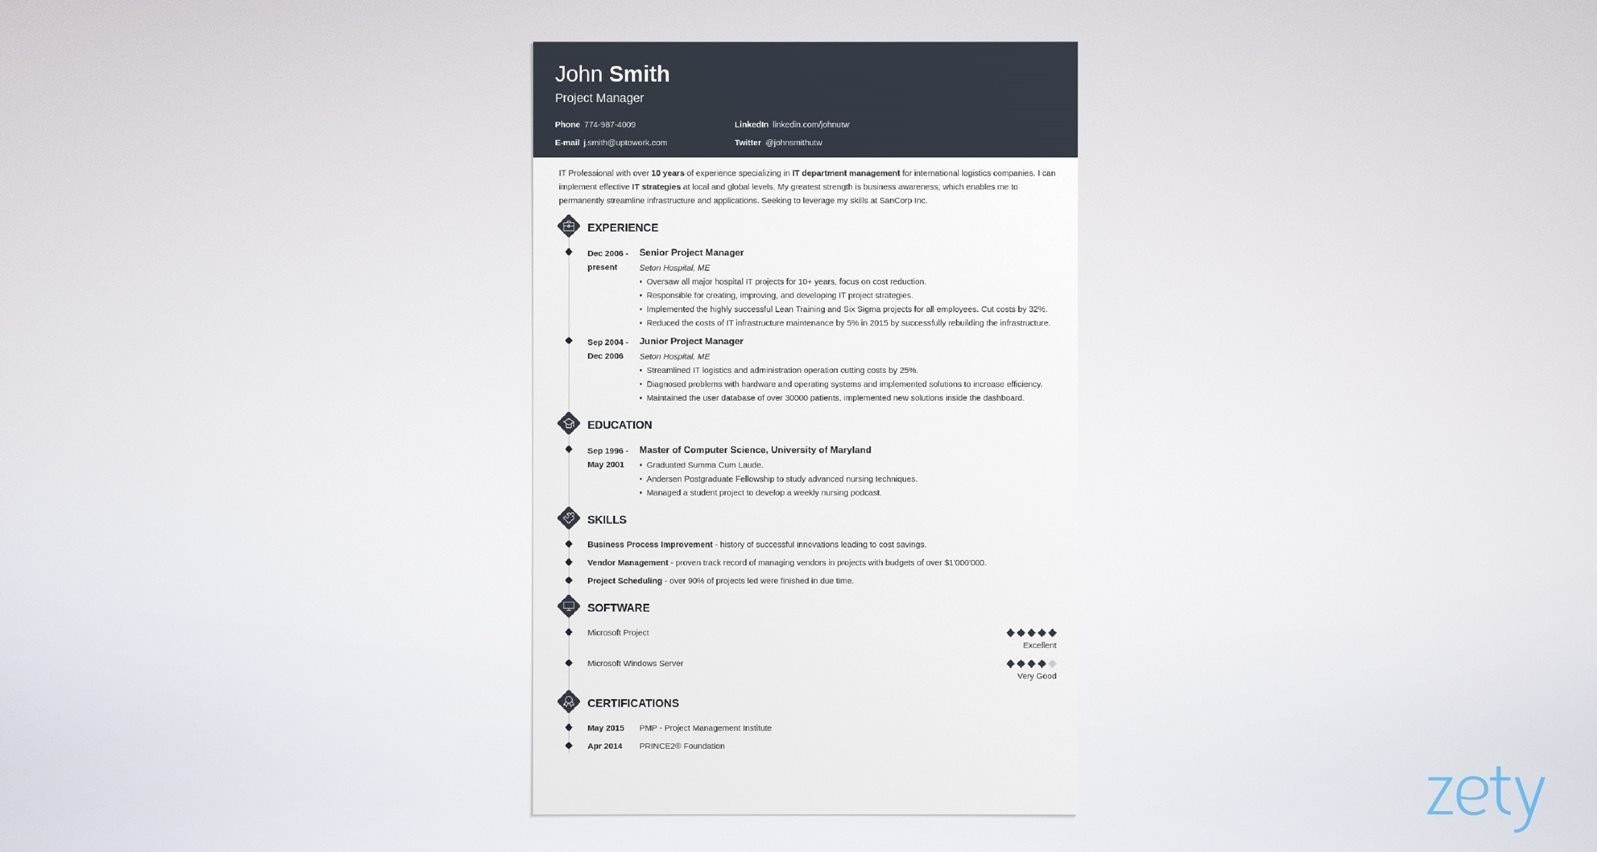 Sample Images Of top Rated Resume Headers Best Resume Templates for 2022 (14lancarrezekiq top Picks to Download)